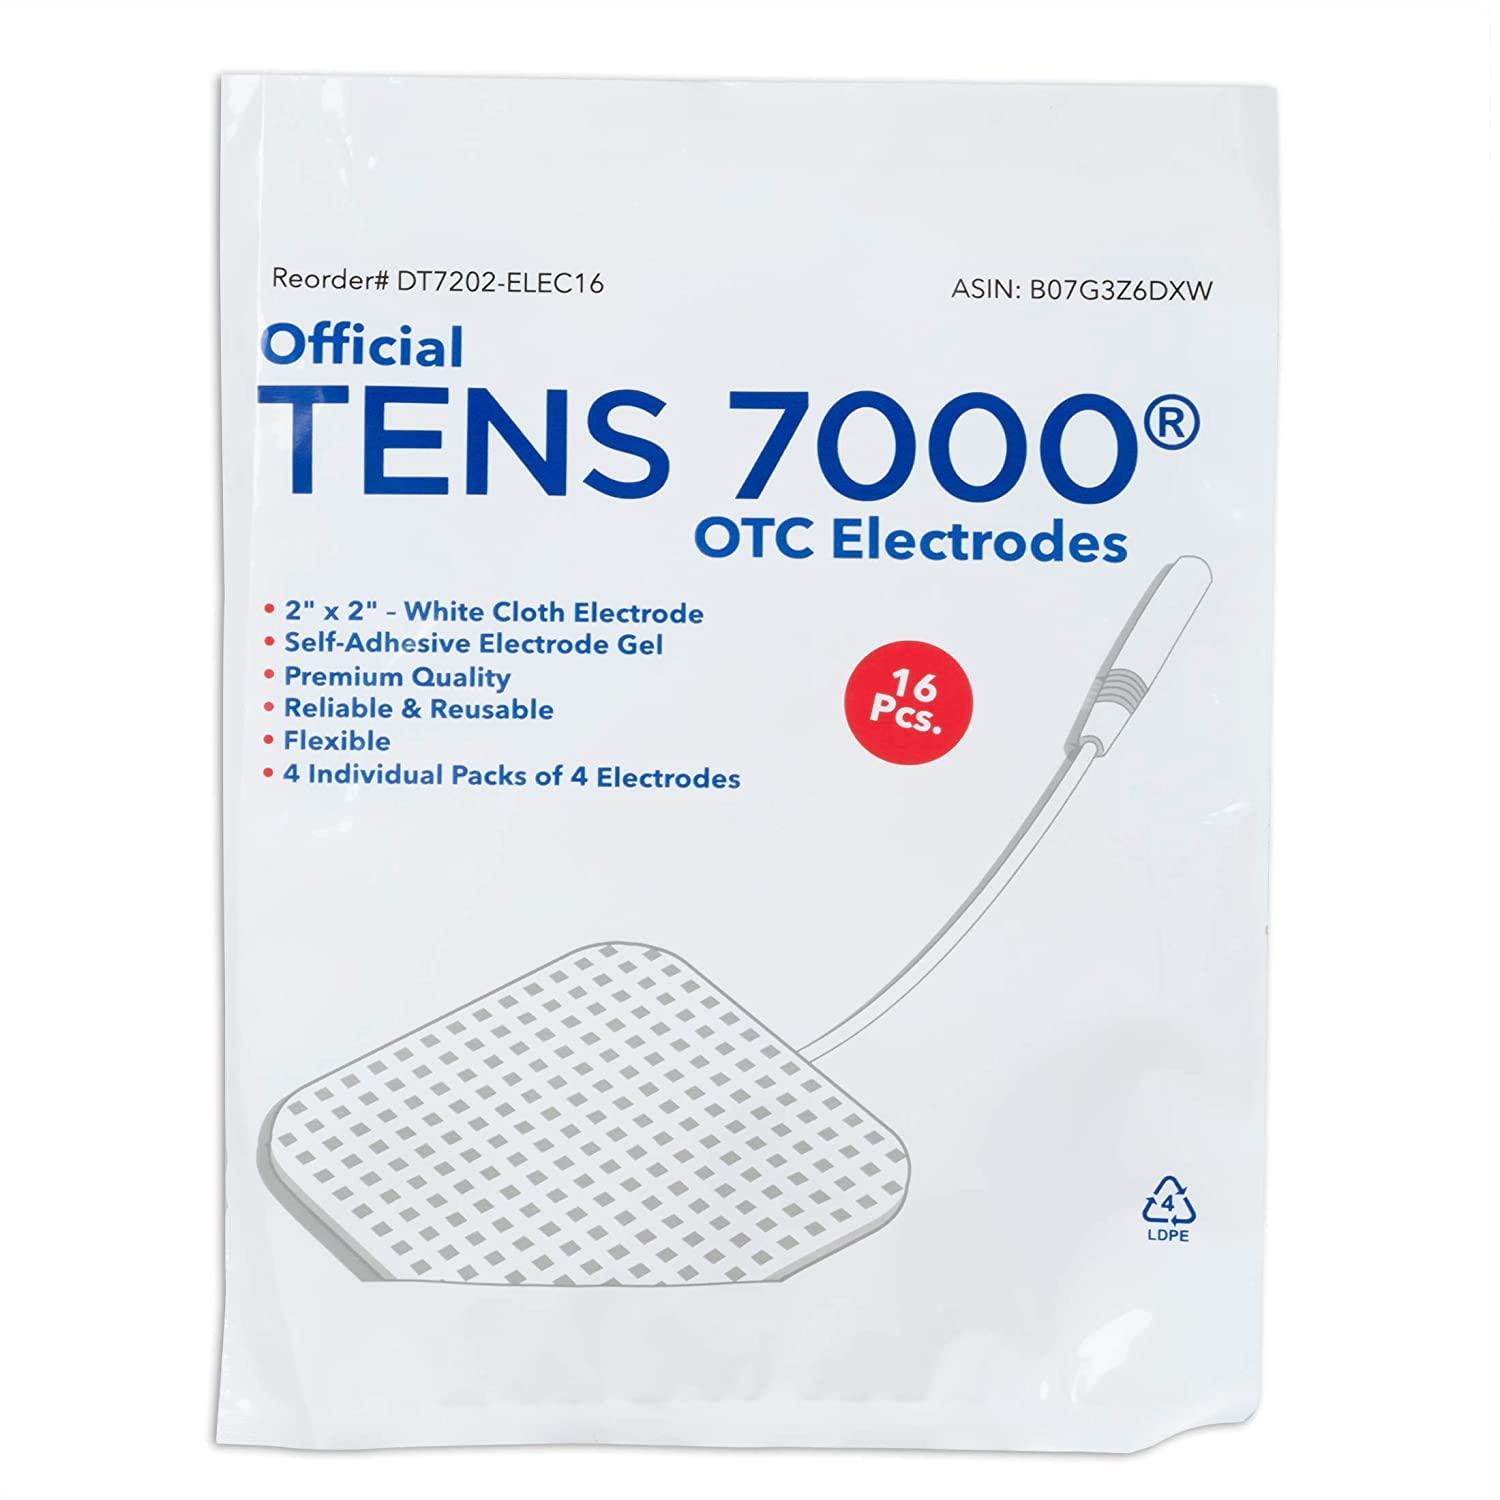 TENS 7000 Official TENS Unit Replacement Pads, 16 Count - Premium Quality  OTC TENS Unit Pads, 2 X 2 - Compatible with Most TENS Machines,  Replacement Electrodes Value Pack